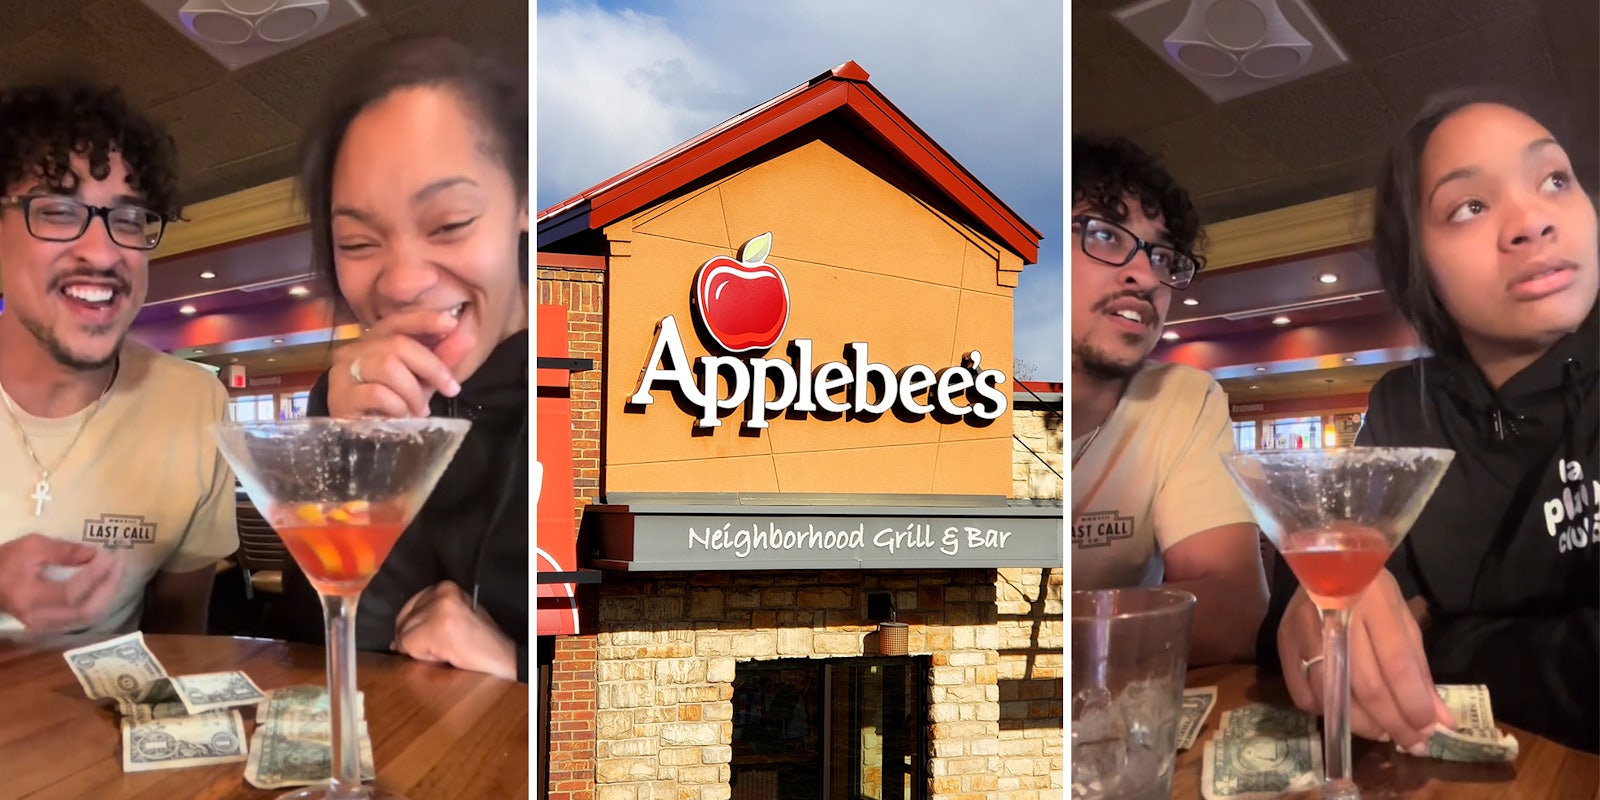 2 customers go to Applebee’s with $3 for Dollaritas. They were served more expensive drinks